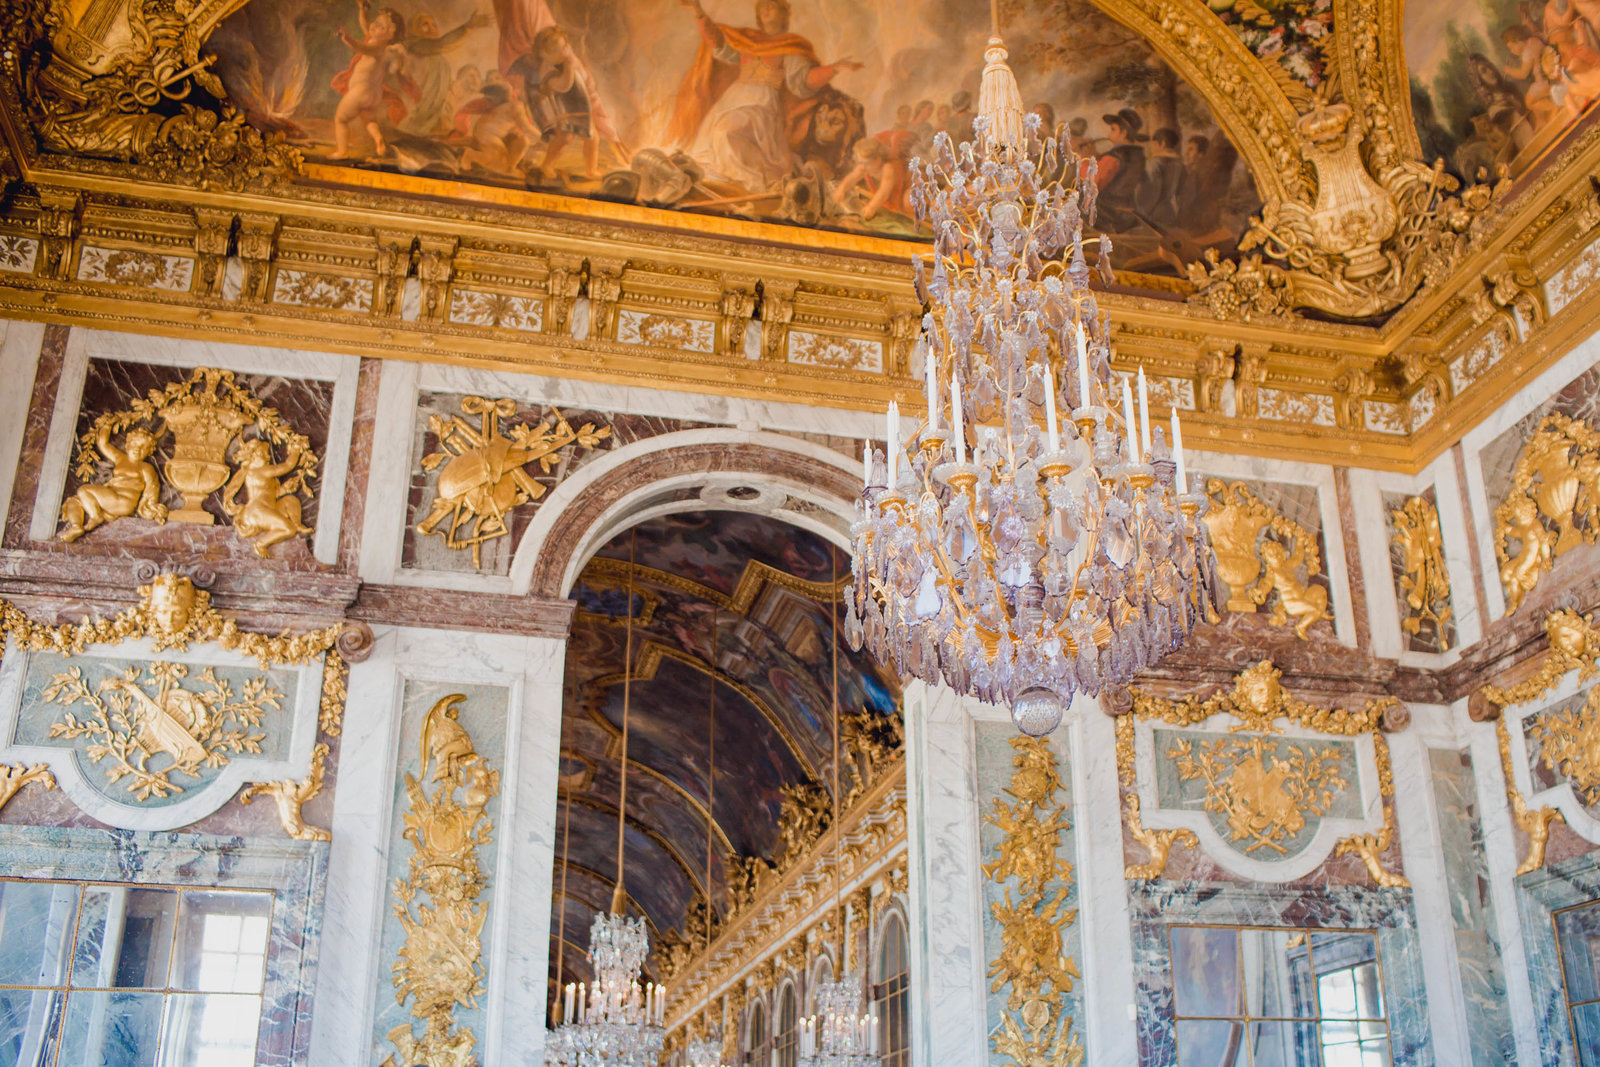 hall-mirrors-gold-palace-versailles-france-travel-destination-kate-timbers-photography-1661